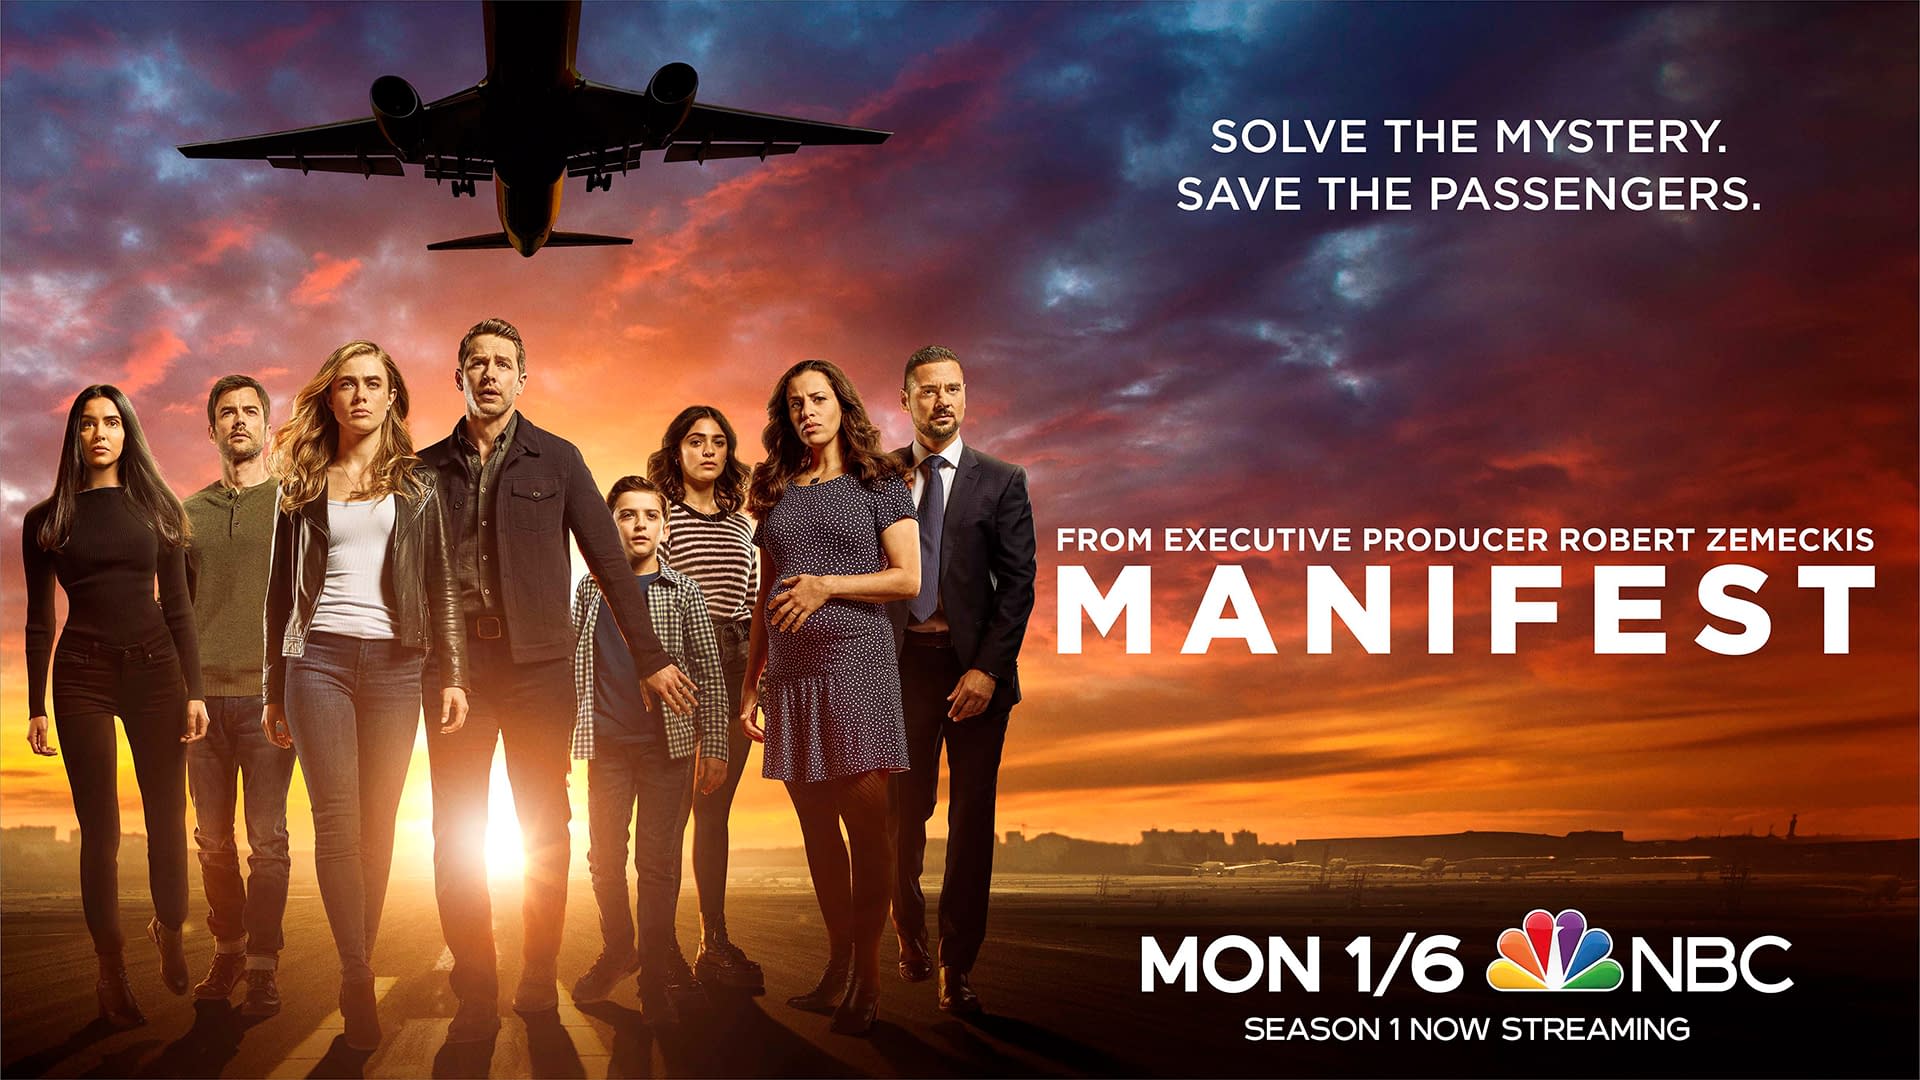 "Manifest" Season 2: Can Ben &#038; Michaela Solve the Mystery and Save the Passengers Before Time Runs Out? [OFFICIAL TRAILER]